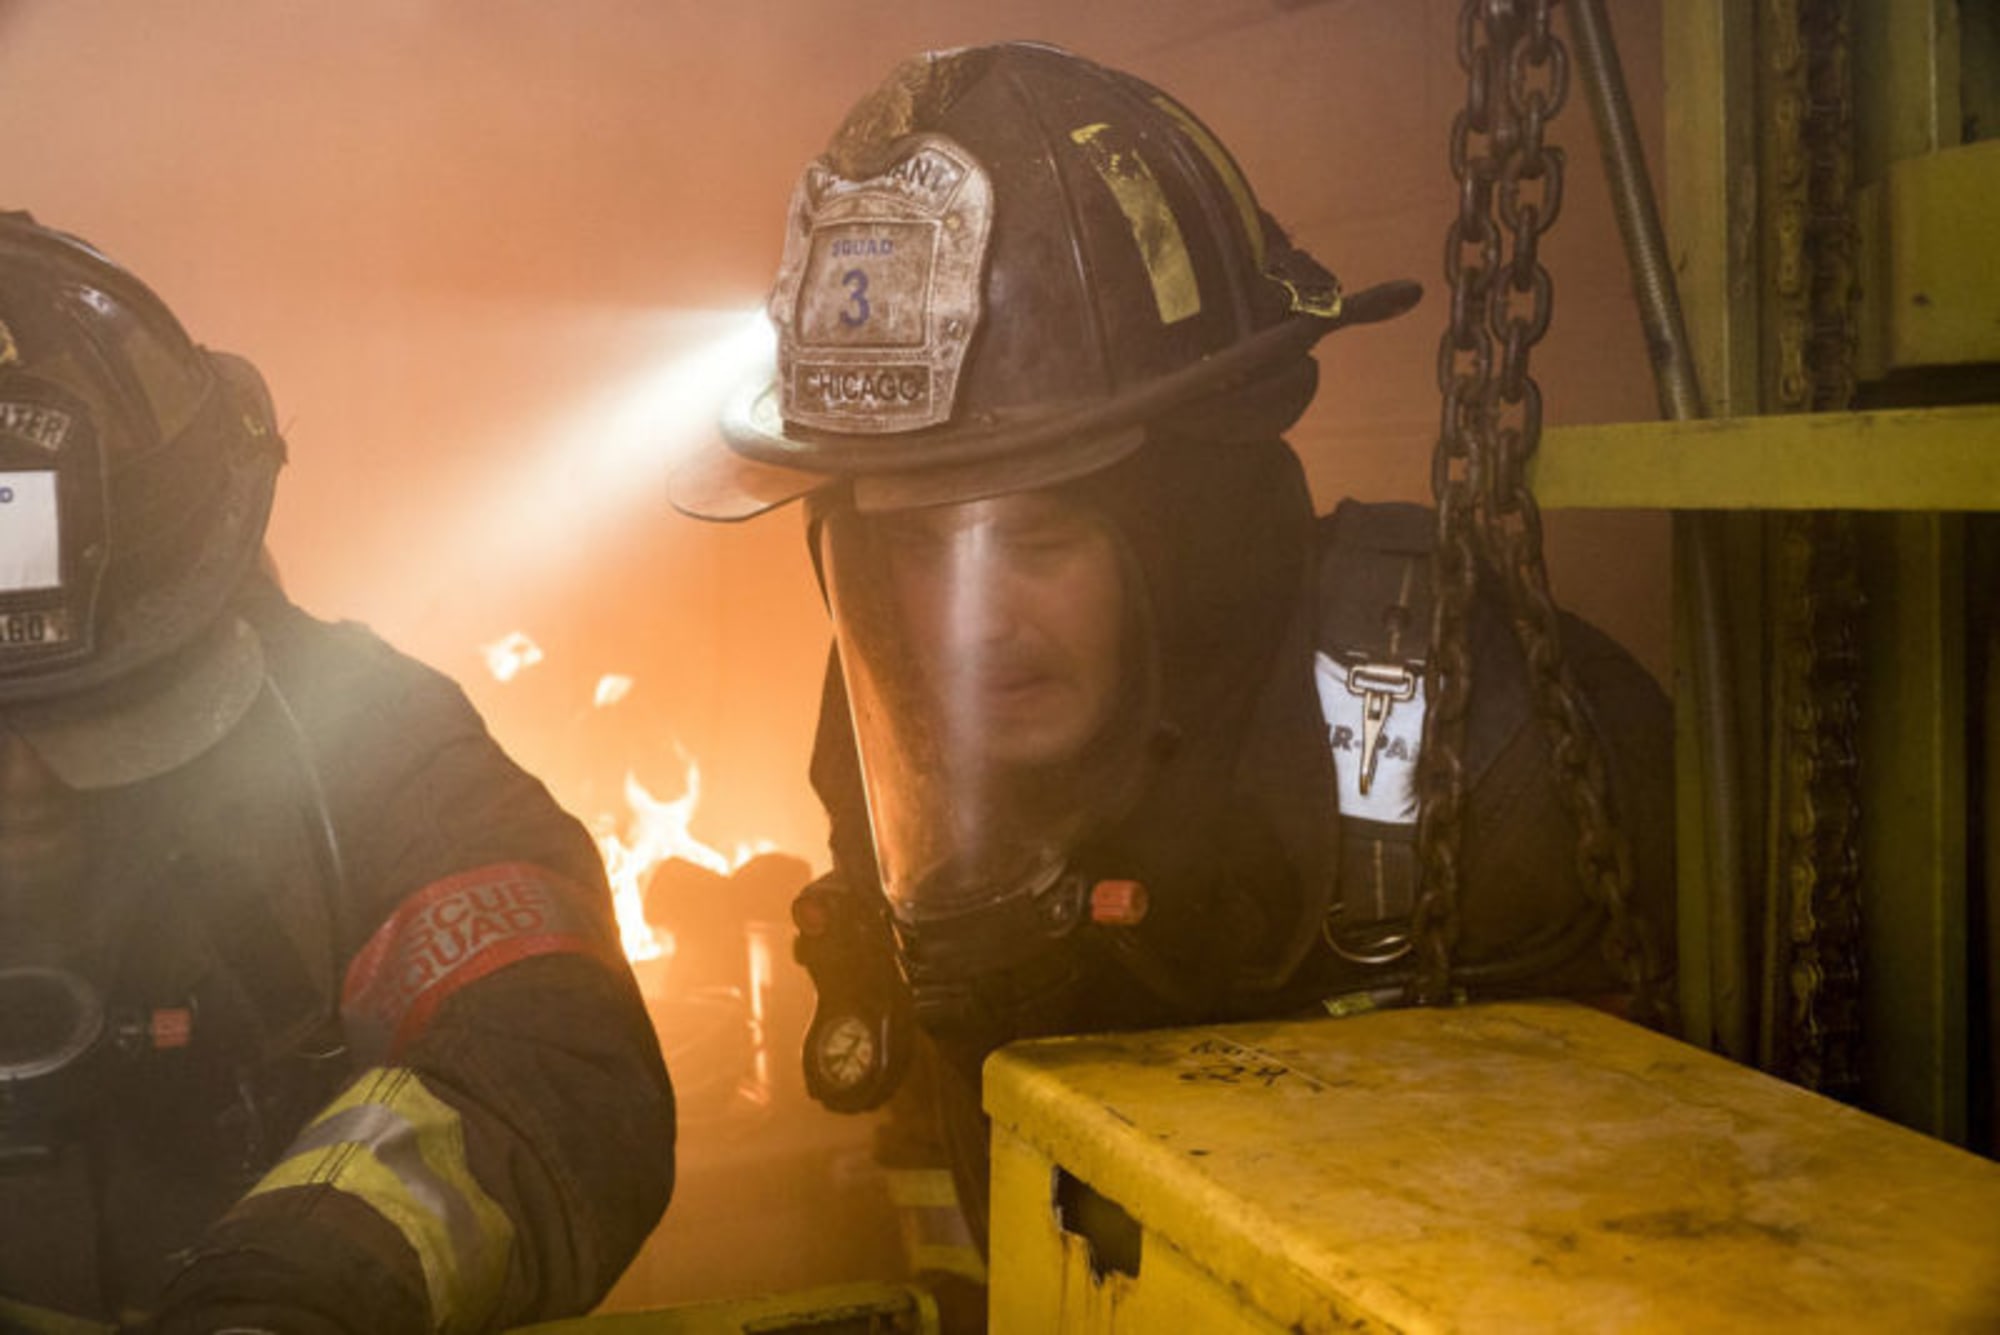 Chicago Fire' season finale preview: Who's in trouble?